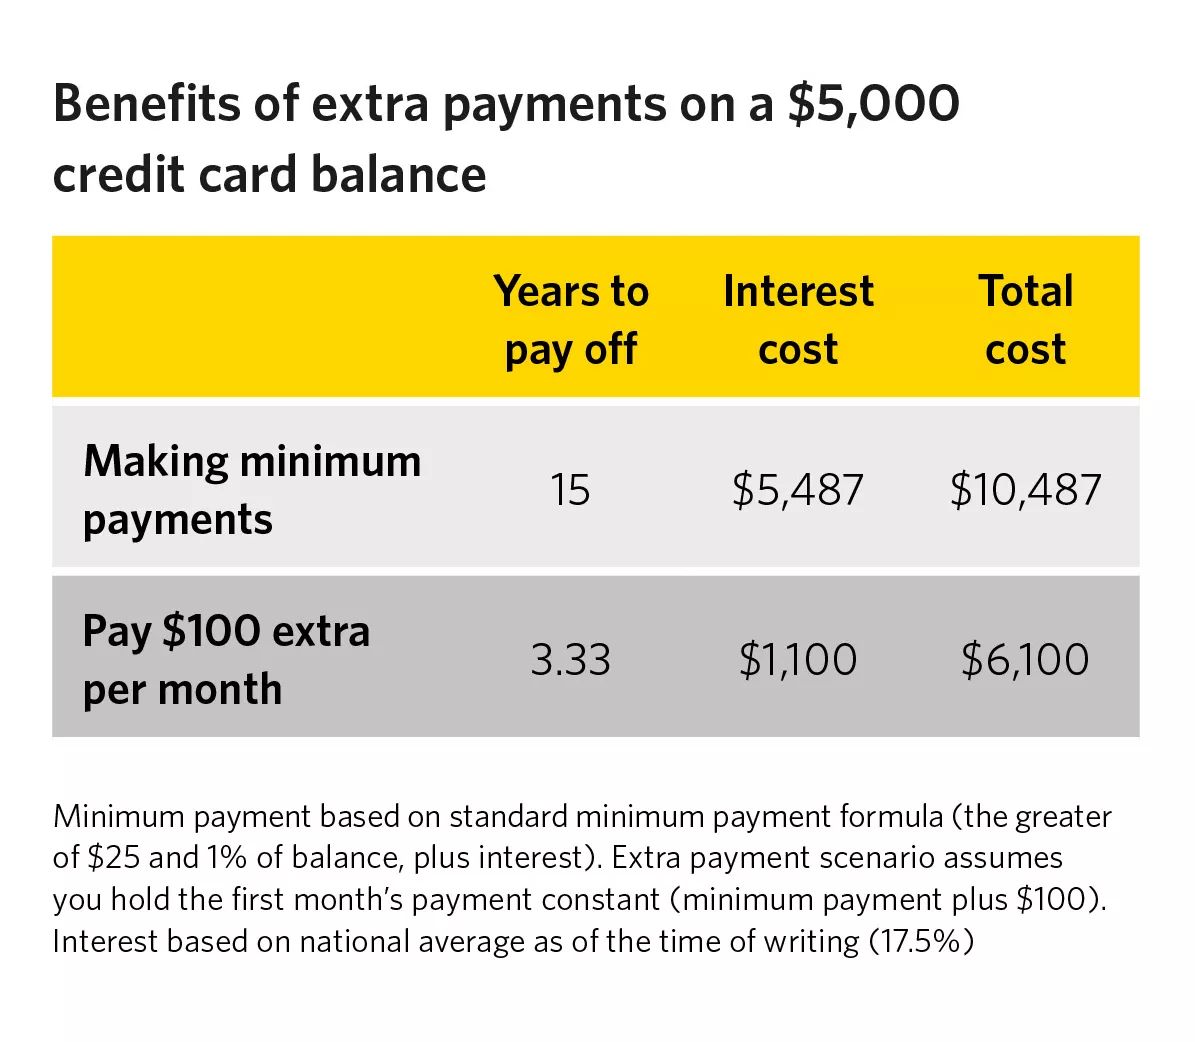  Benefits of extra payments on a $5000 credit card balance.
